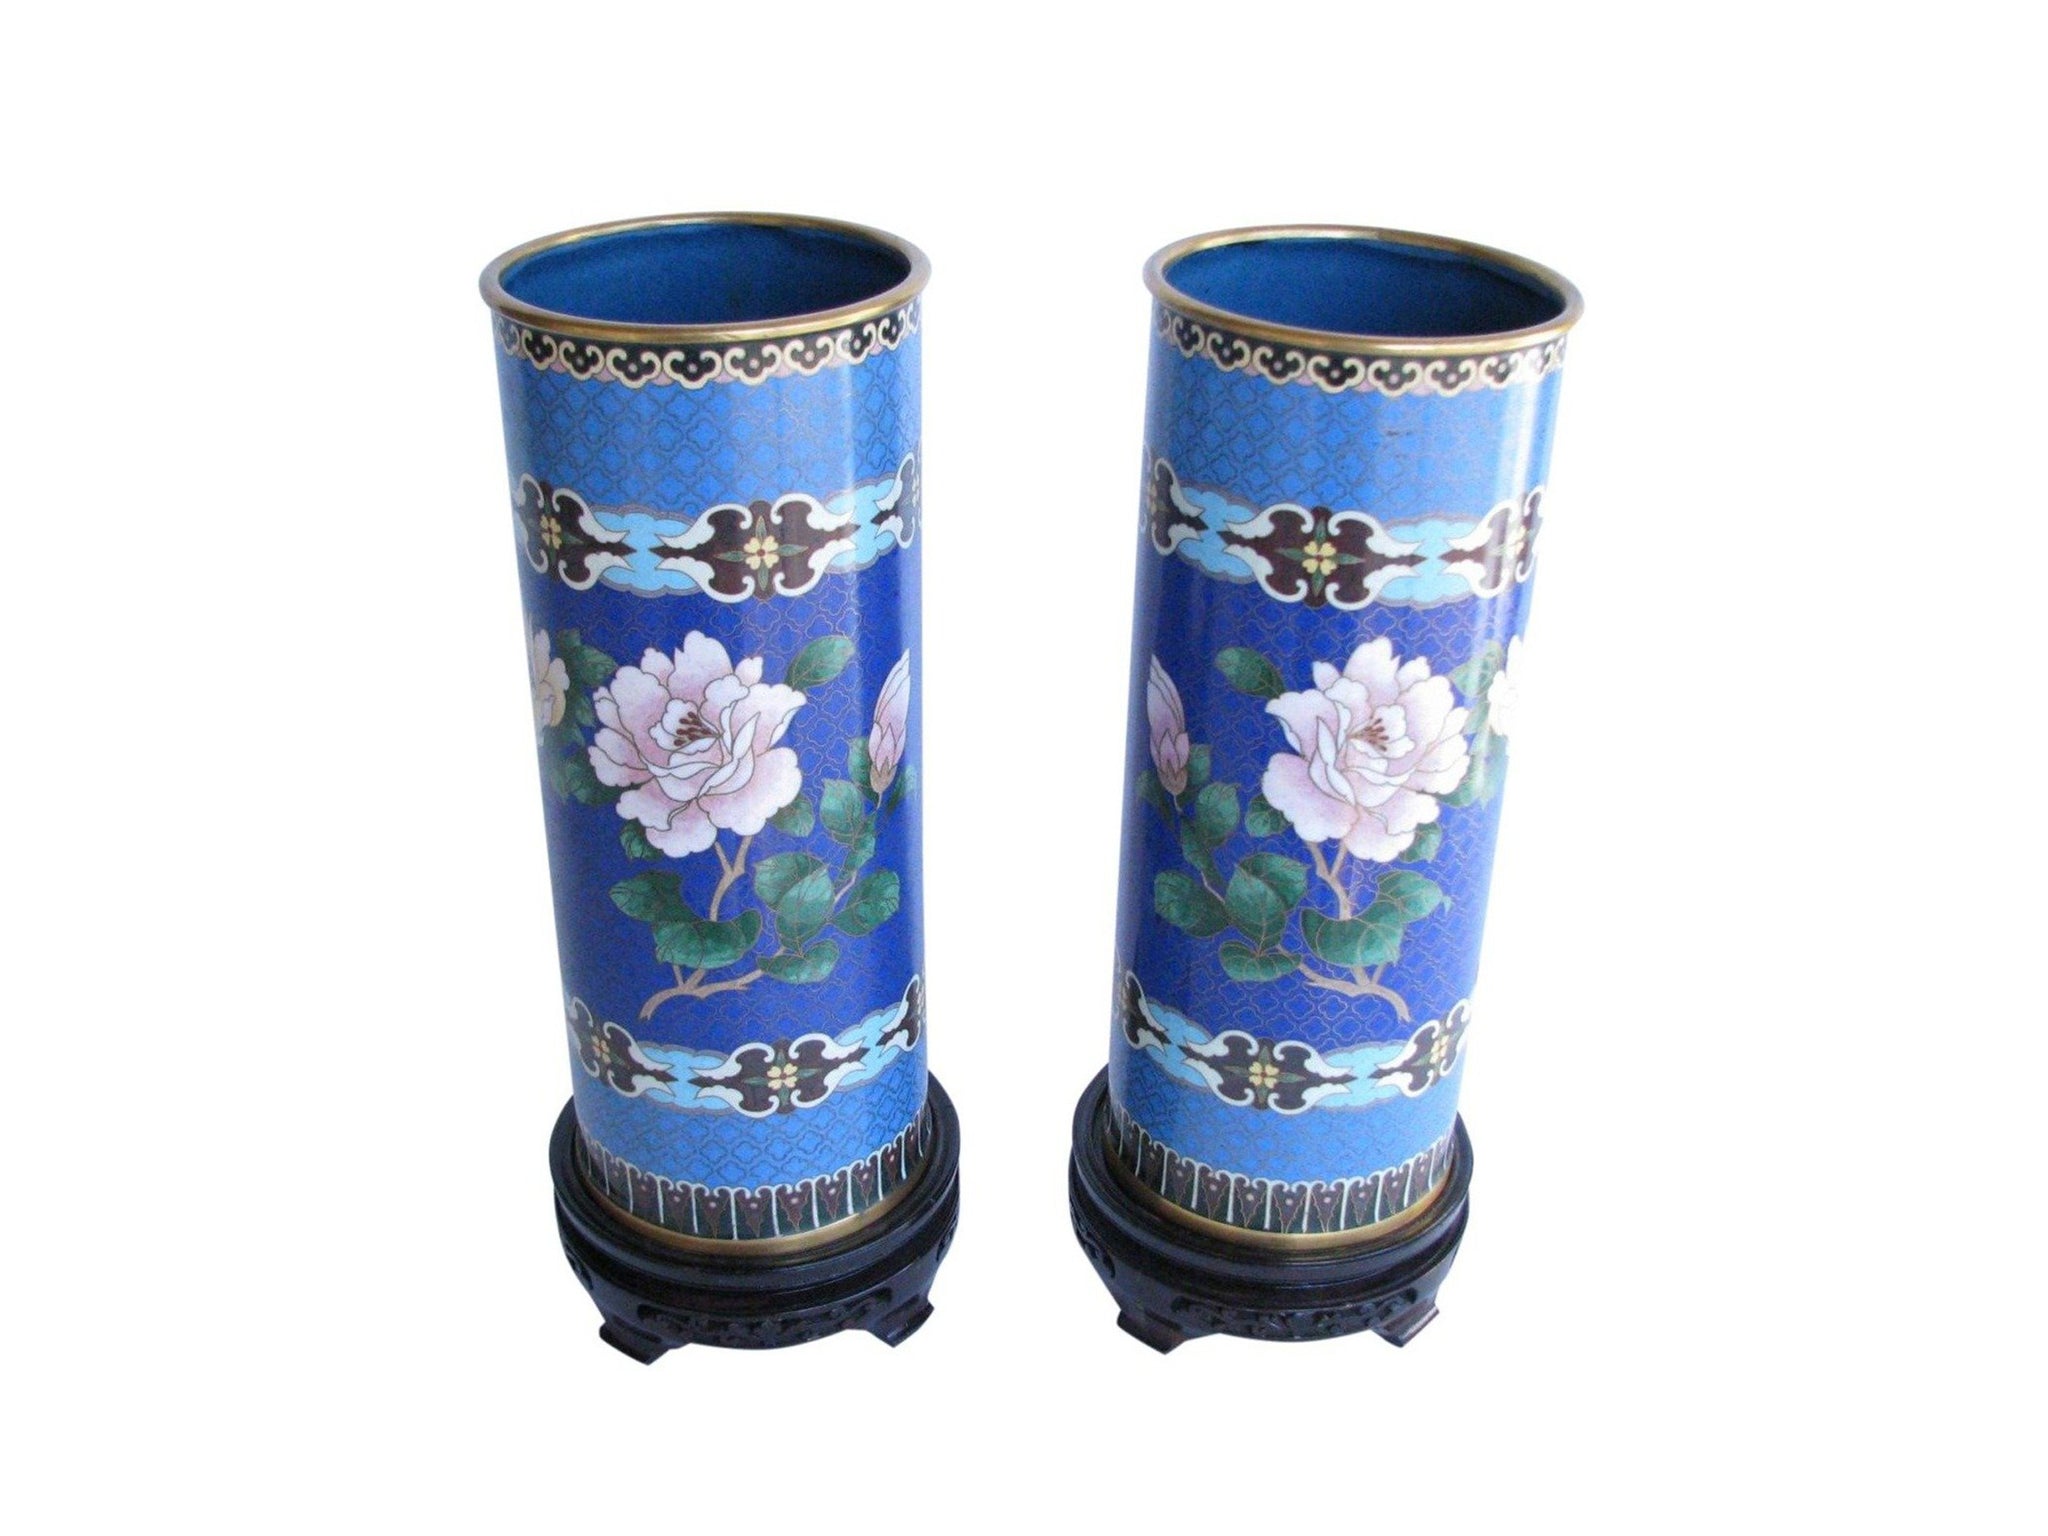 edgebrookhouse - 19th Century Cloisonné Enamel on Copper Vase on Rosewood Stand - a Pair